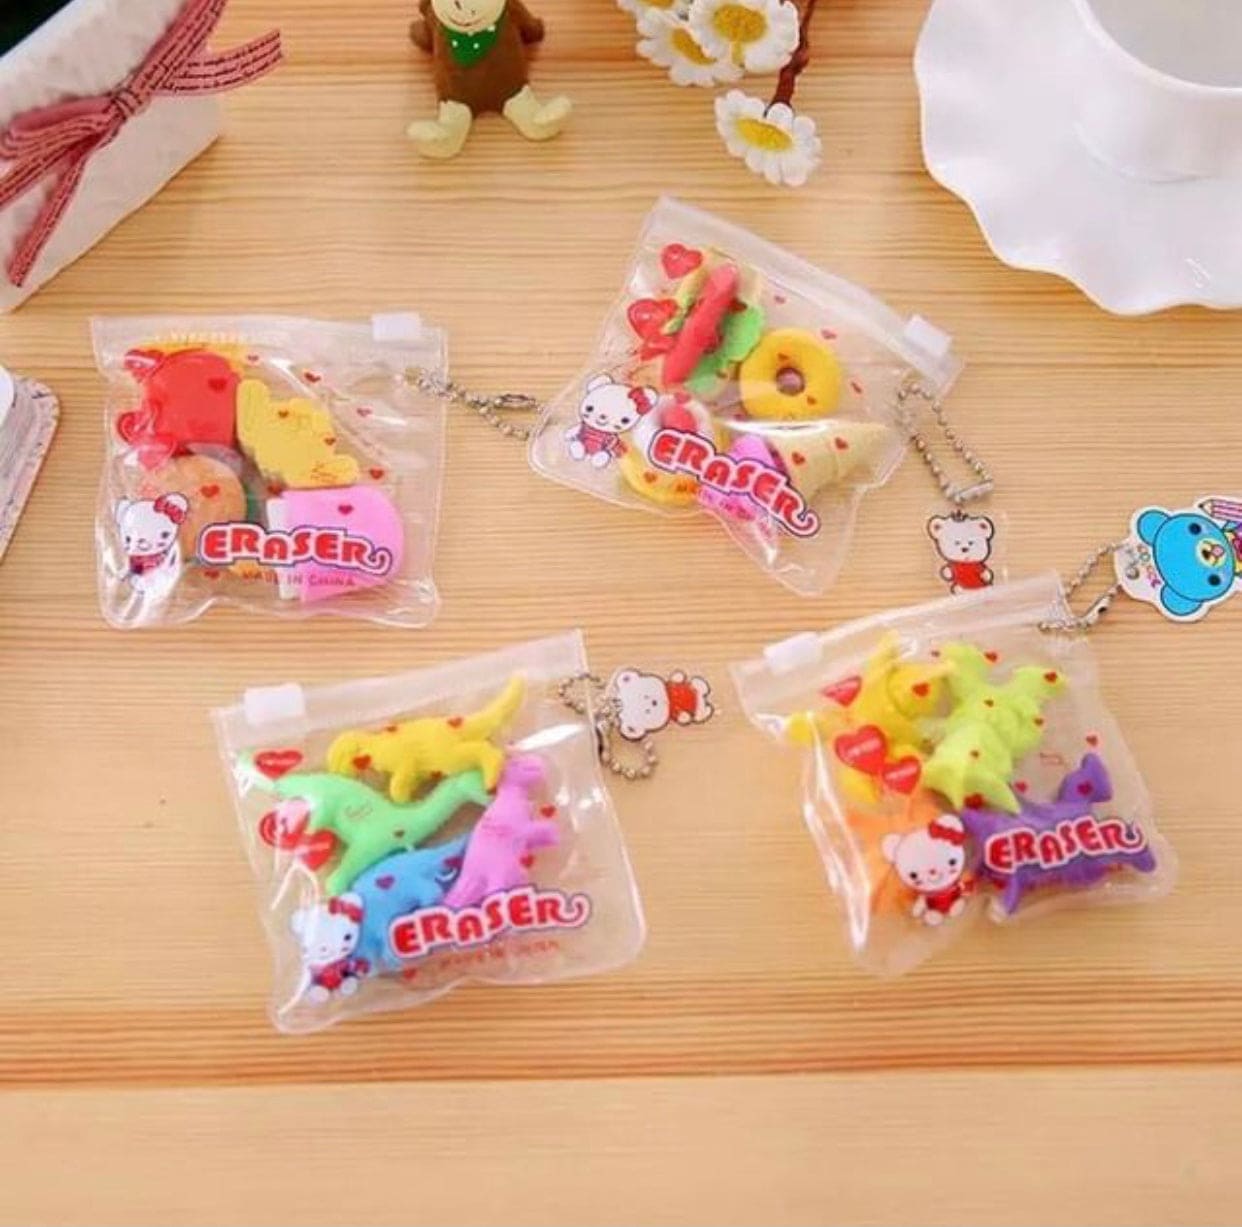 Set Of 4 Erasers Pencil Rubber Stationery Bag, Creative School ag Animal Fruit Cake Rubber, Cartoon Cute School Rubber, Lovely Cartoon Animal Sports Themed Mini Erasers